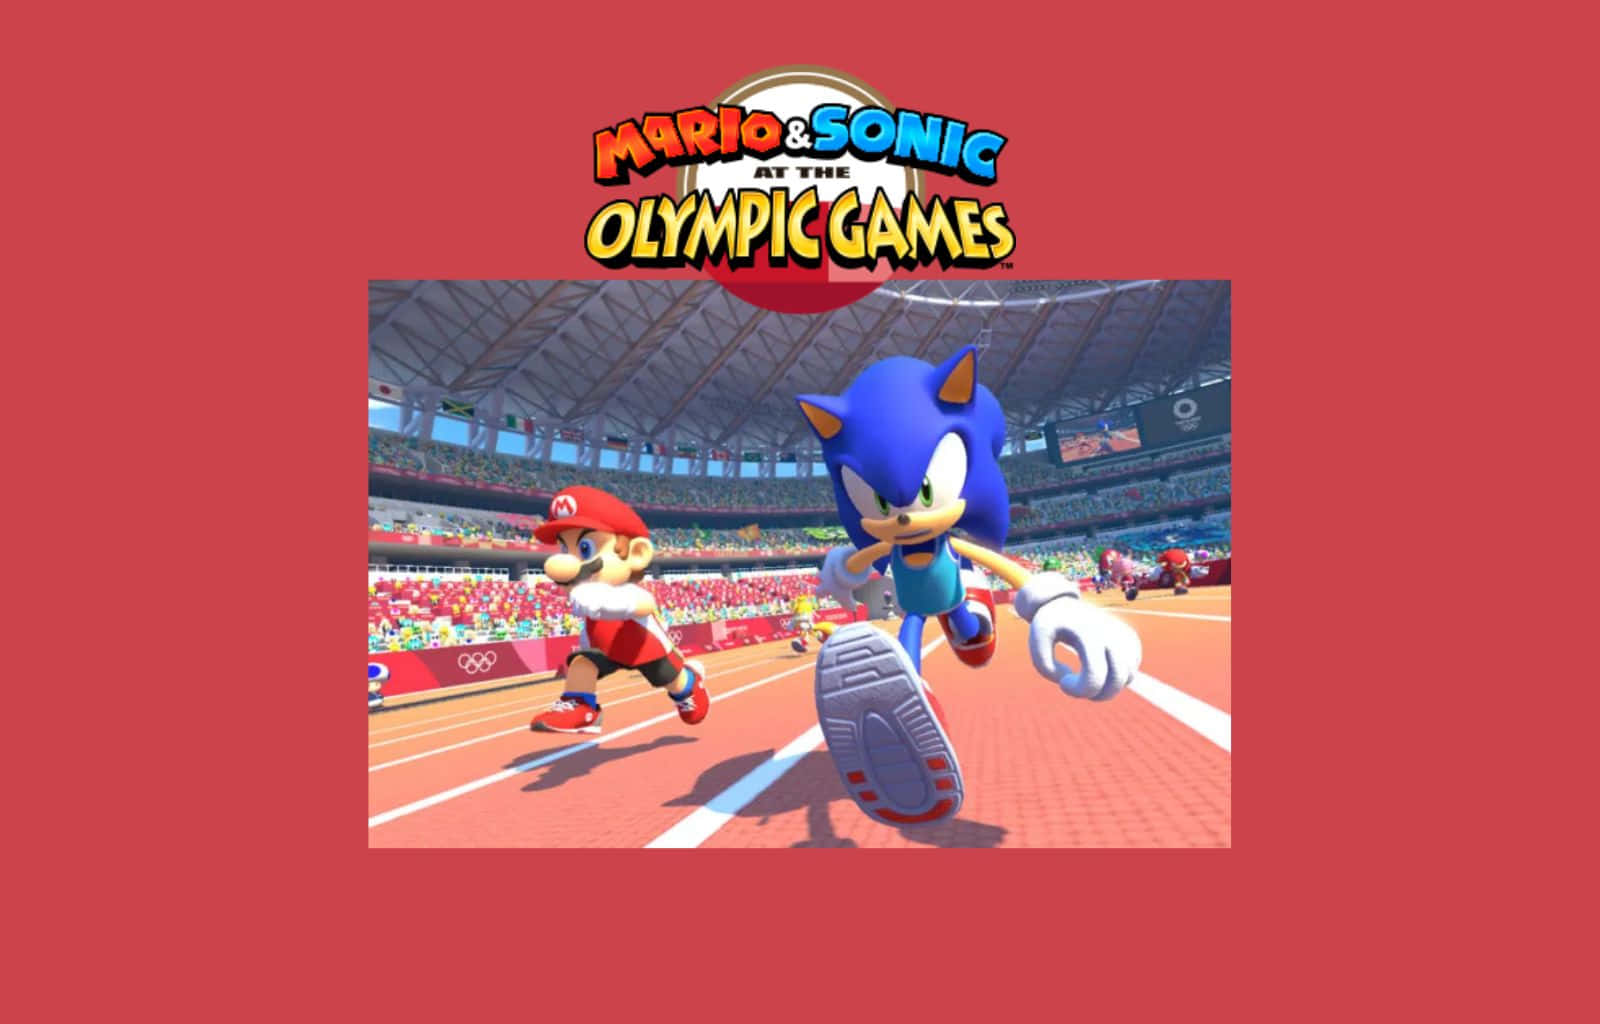 Mario And Sonic At The Olympic Games 1600 X 1024 Wallpaper Wallpaper